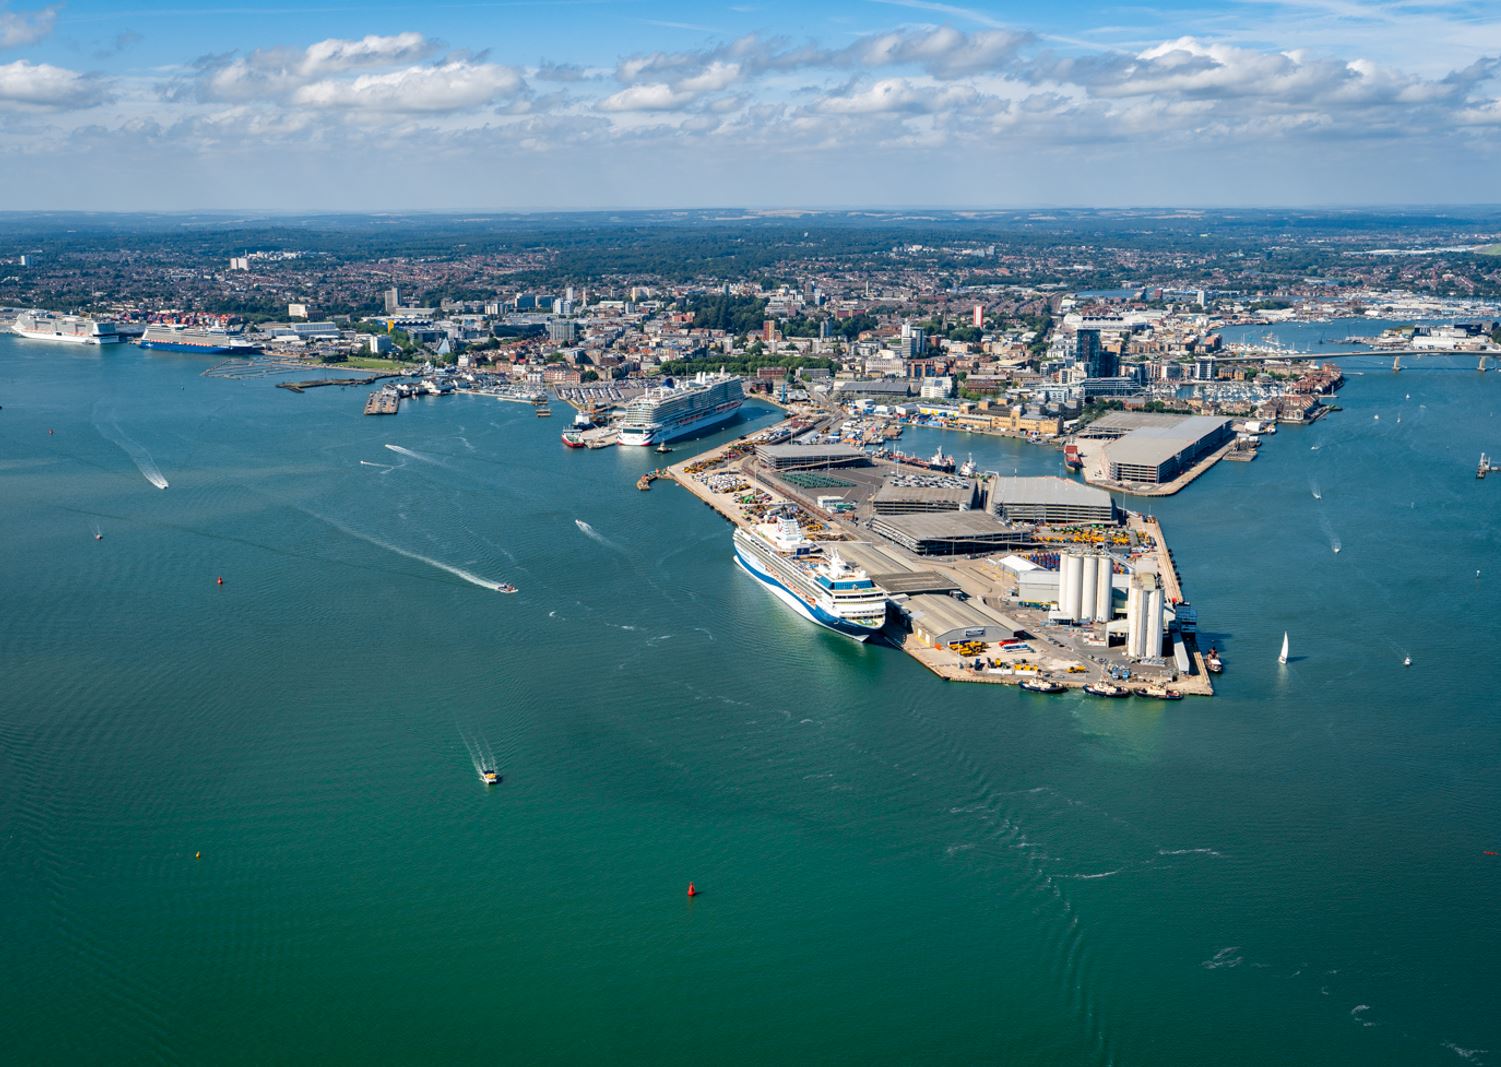 Solent’s careers leaders invited to sign up for Maritime Mondays for sector insights